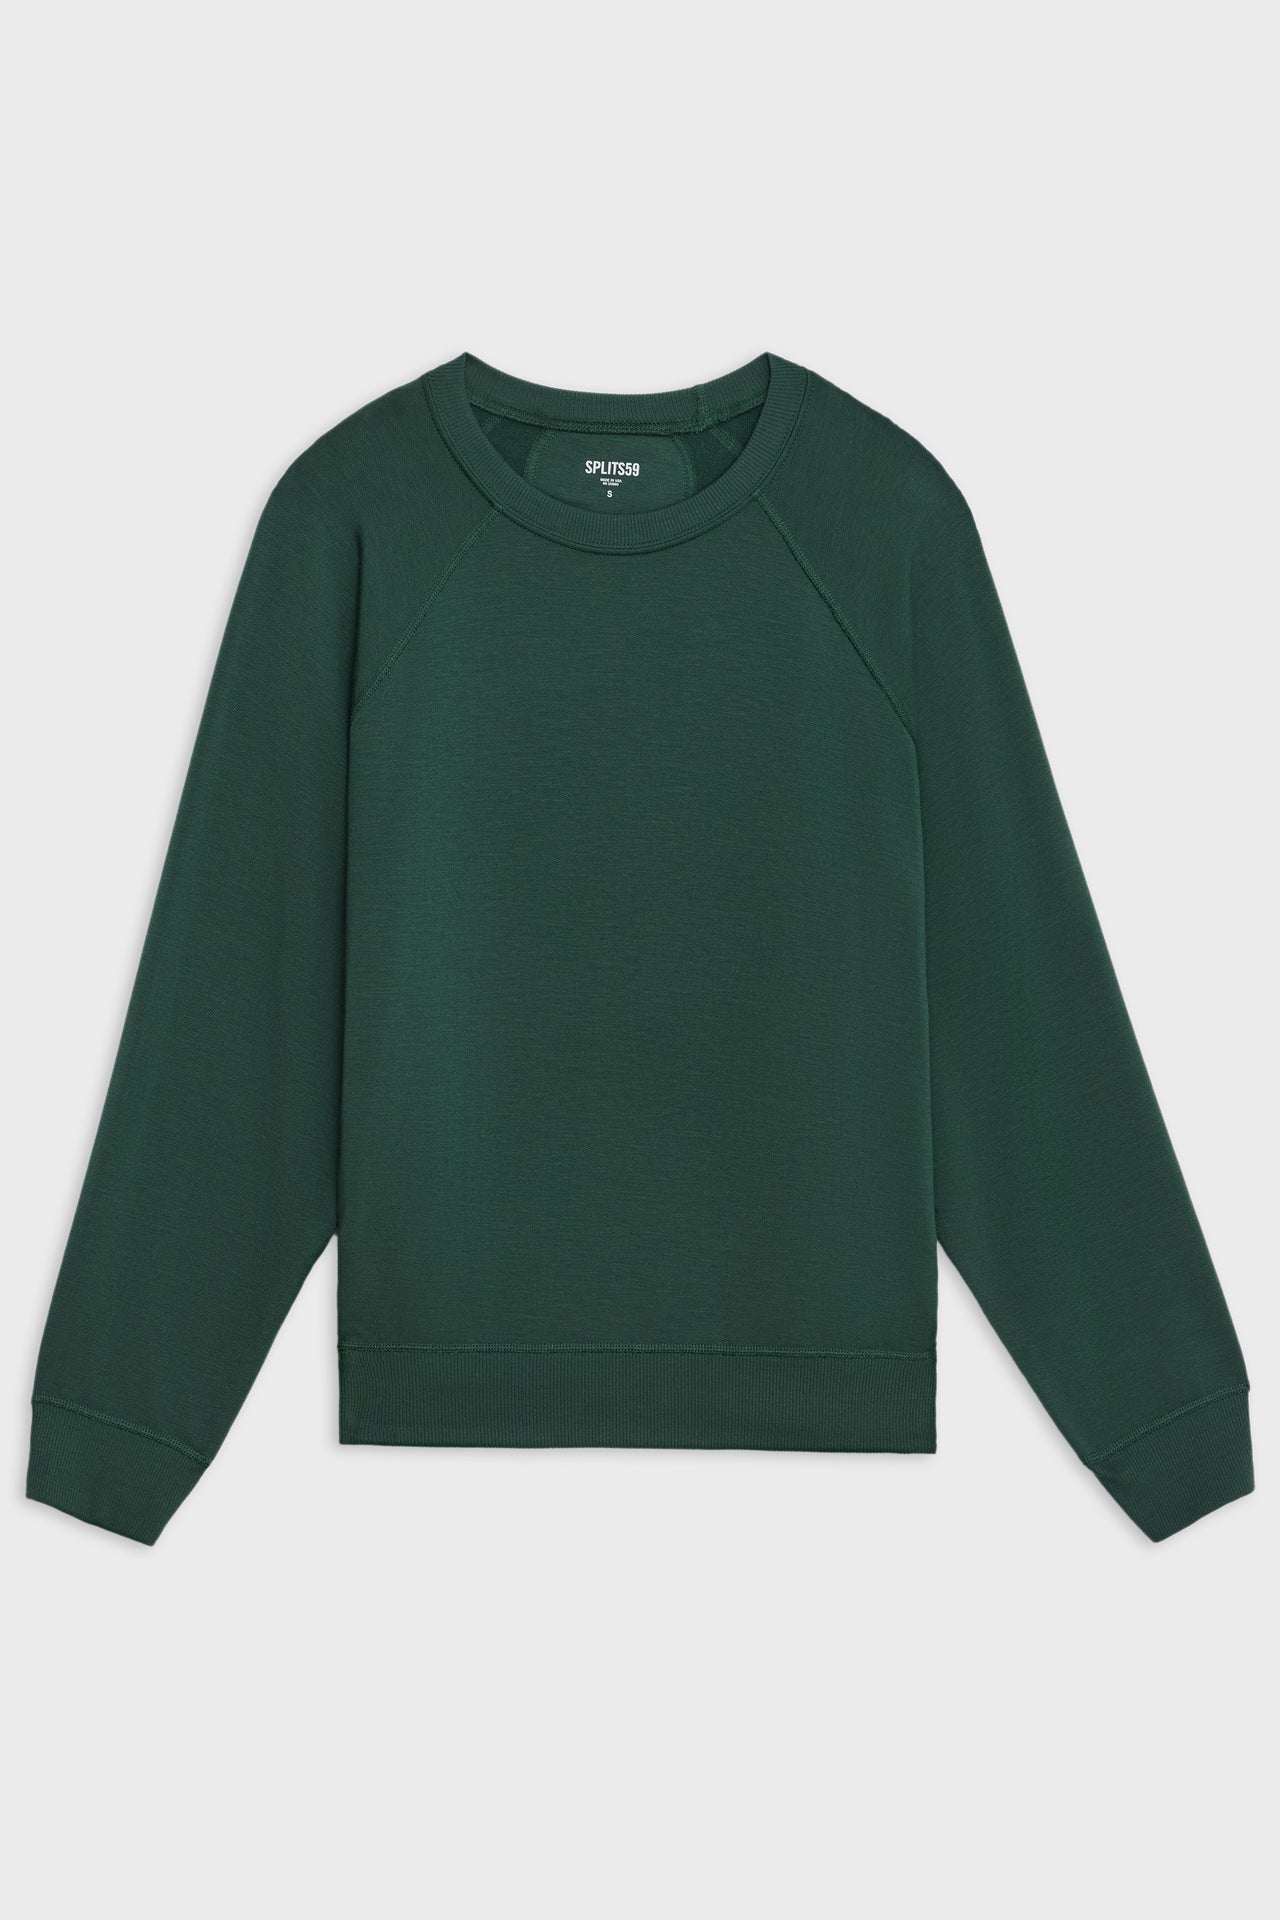 Flat view of dark green sweatshirt with visible stitching and ribbed hem